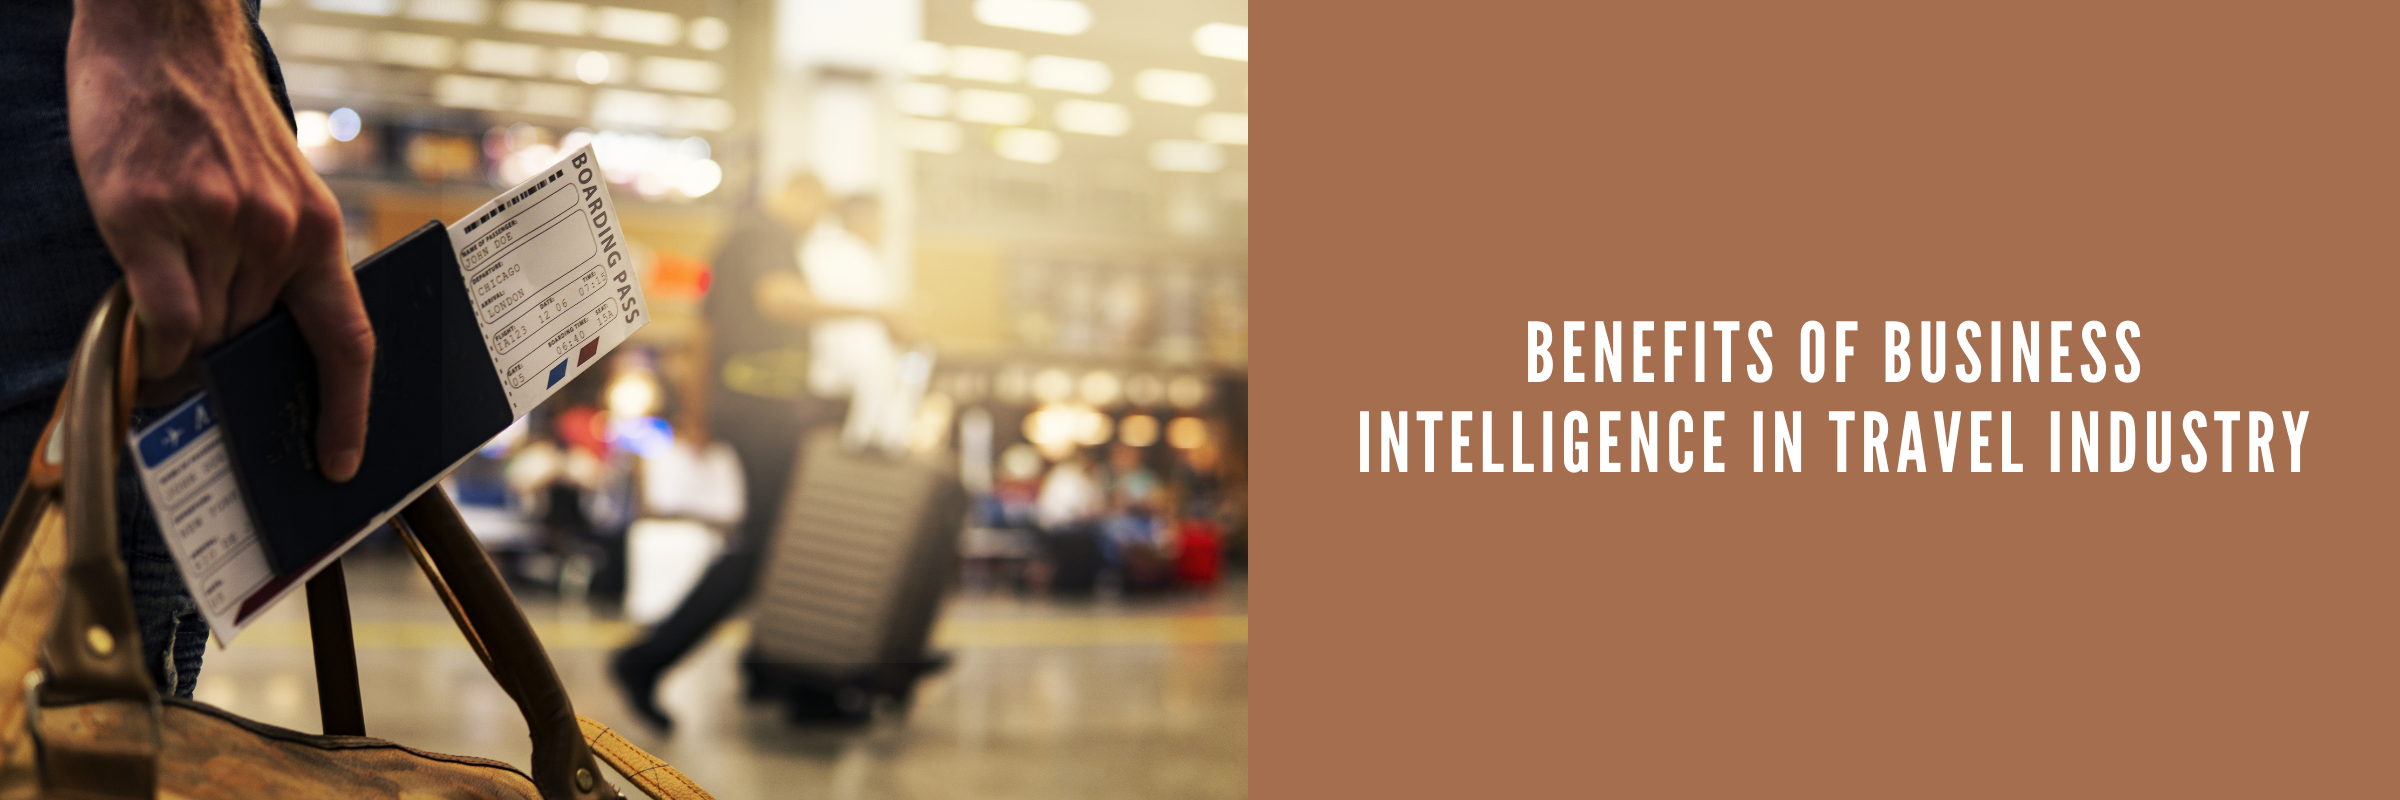 Benefits of Business Intelligence in the Travel Industry